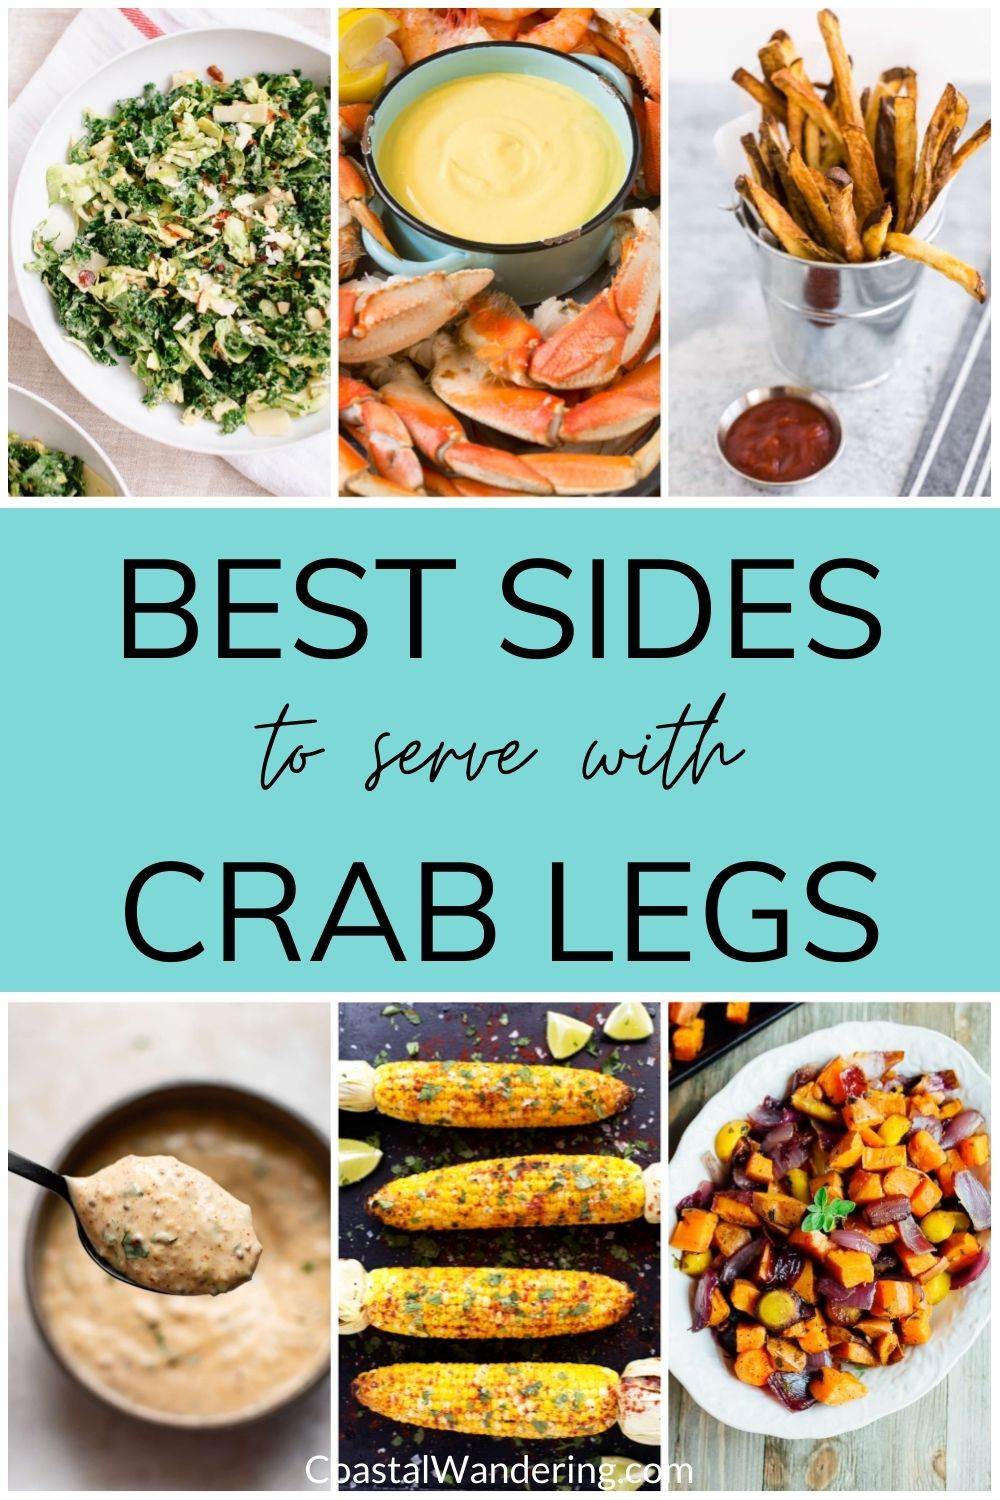 What To Serve With Crab Legs - Coastal Wandering